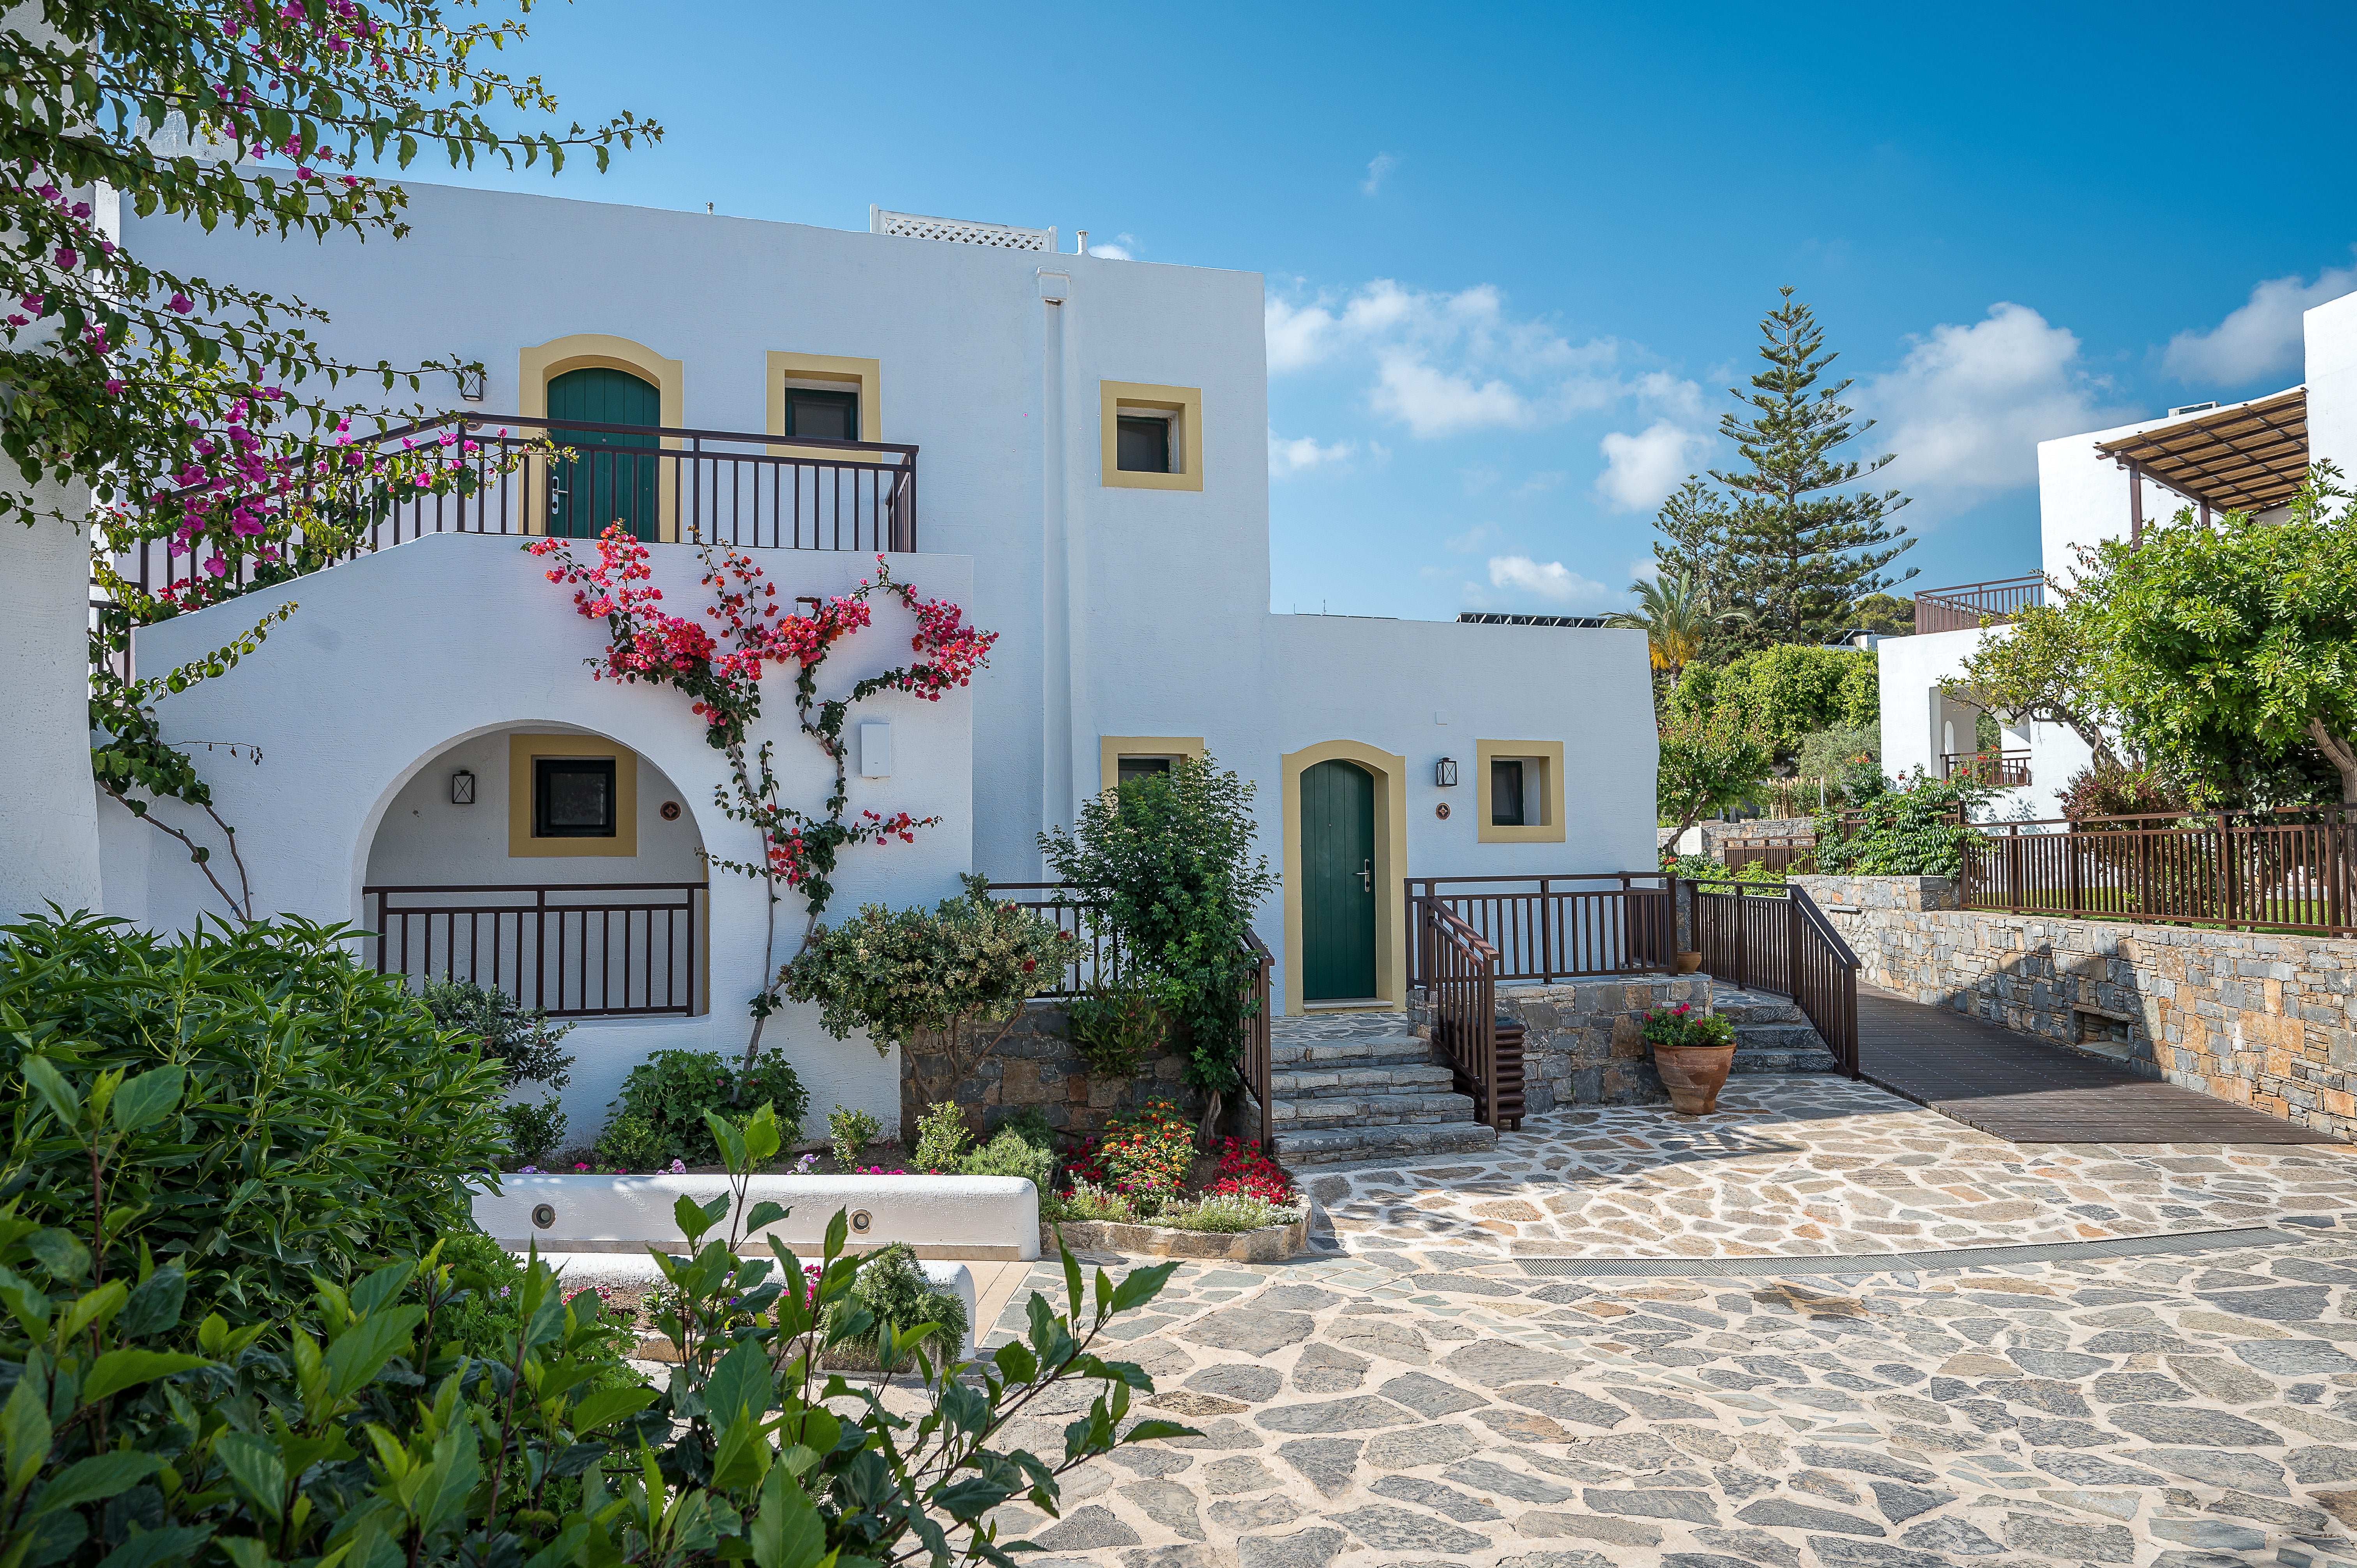 Parts of the resort have the feel of a Greek village